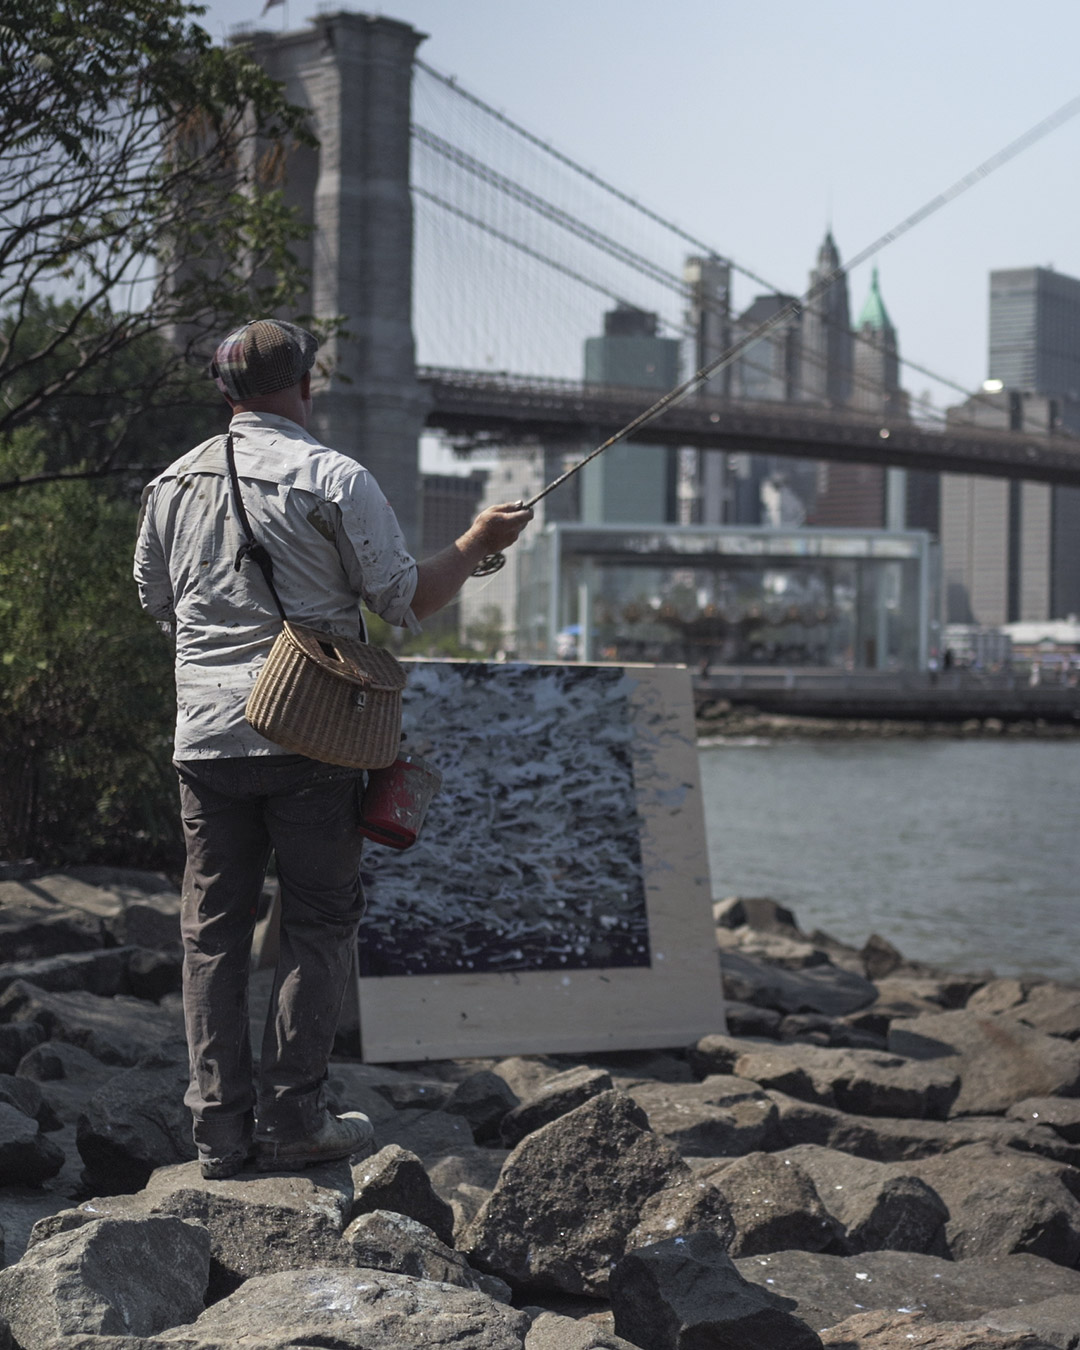 “EAST RIVER ENDANGERED RIVERS PROJECT” 